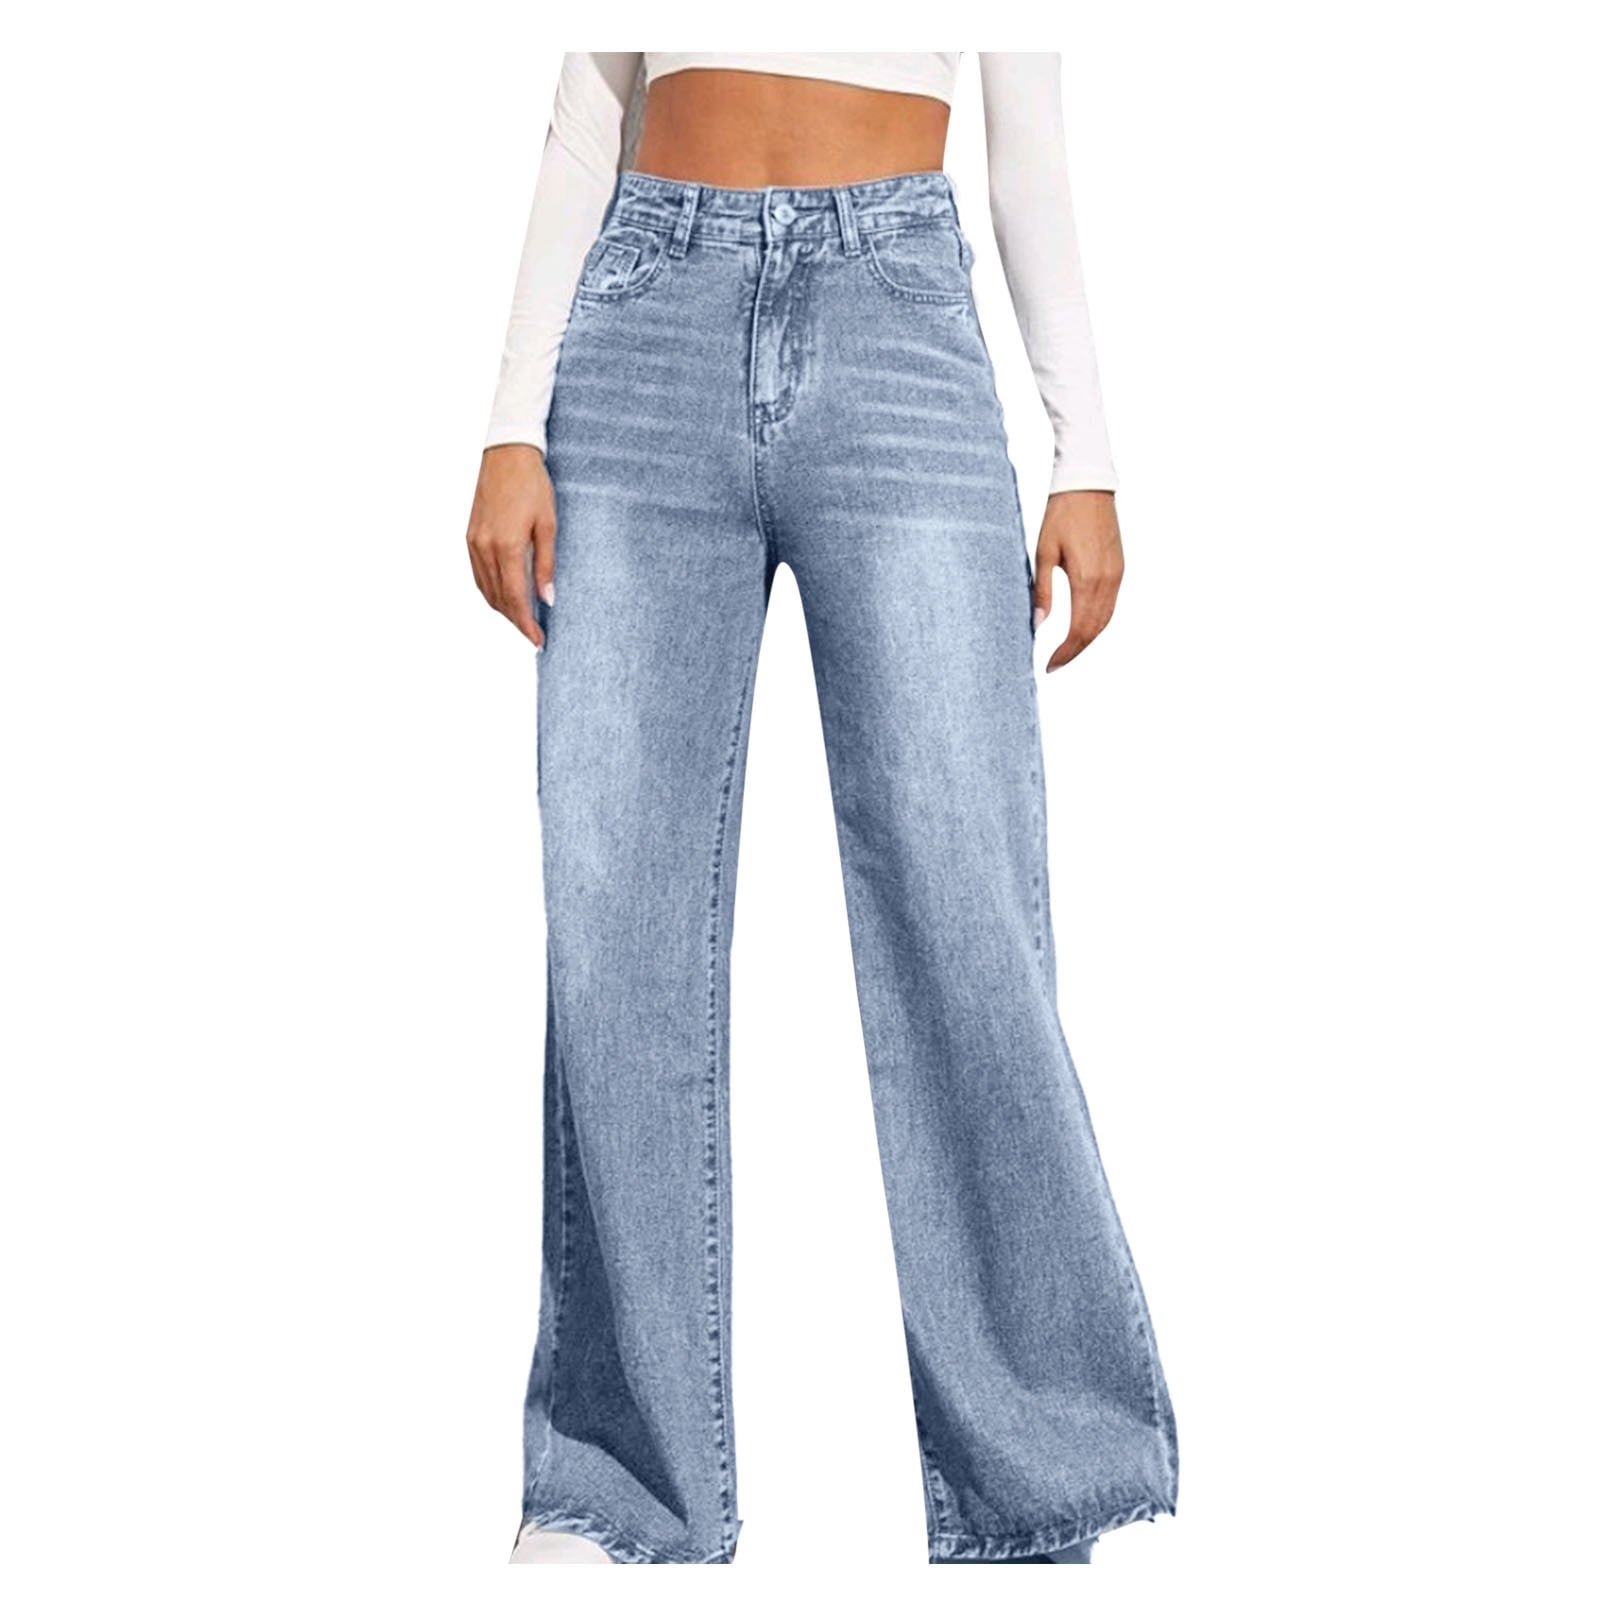 Jeans for Women Stretchy High Waisted Straight Leg Trousers Distressed  Casual Denim Pants with Pockets 